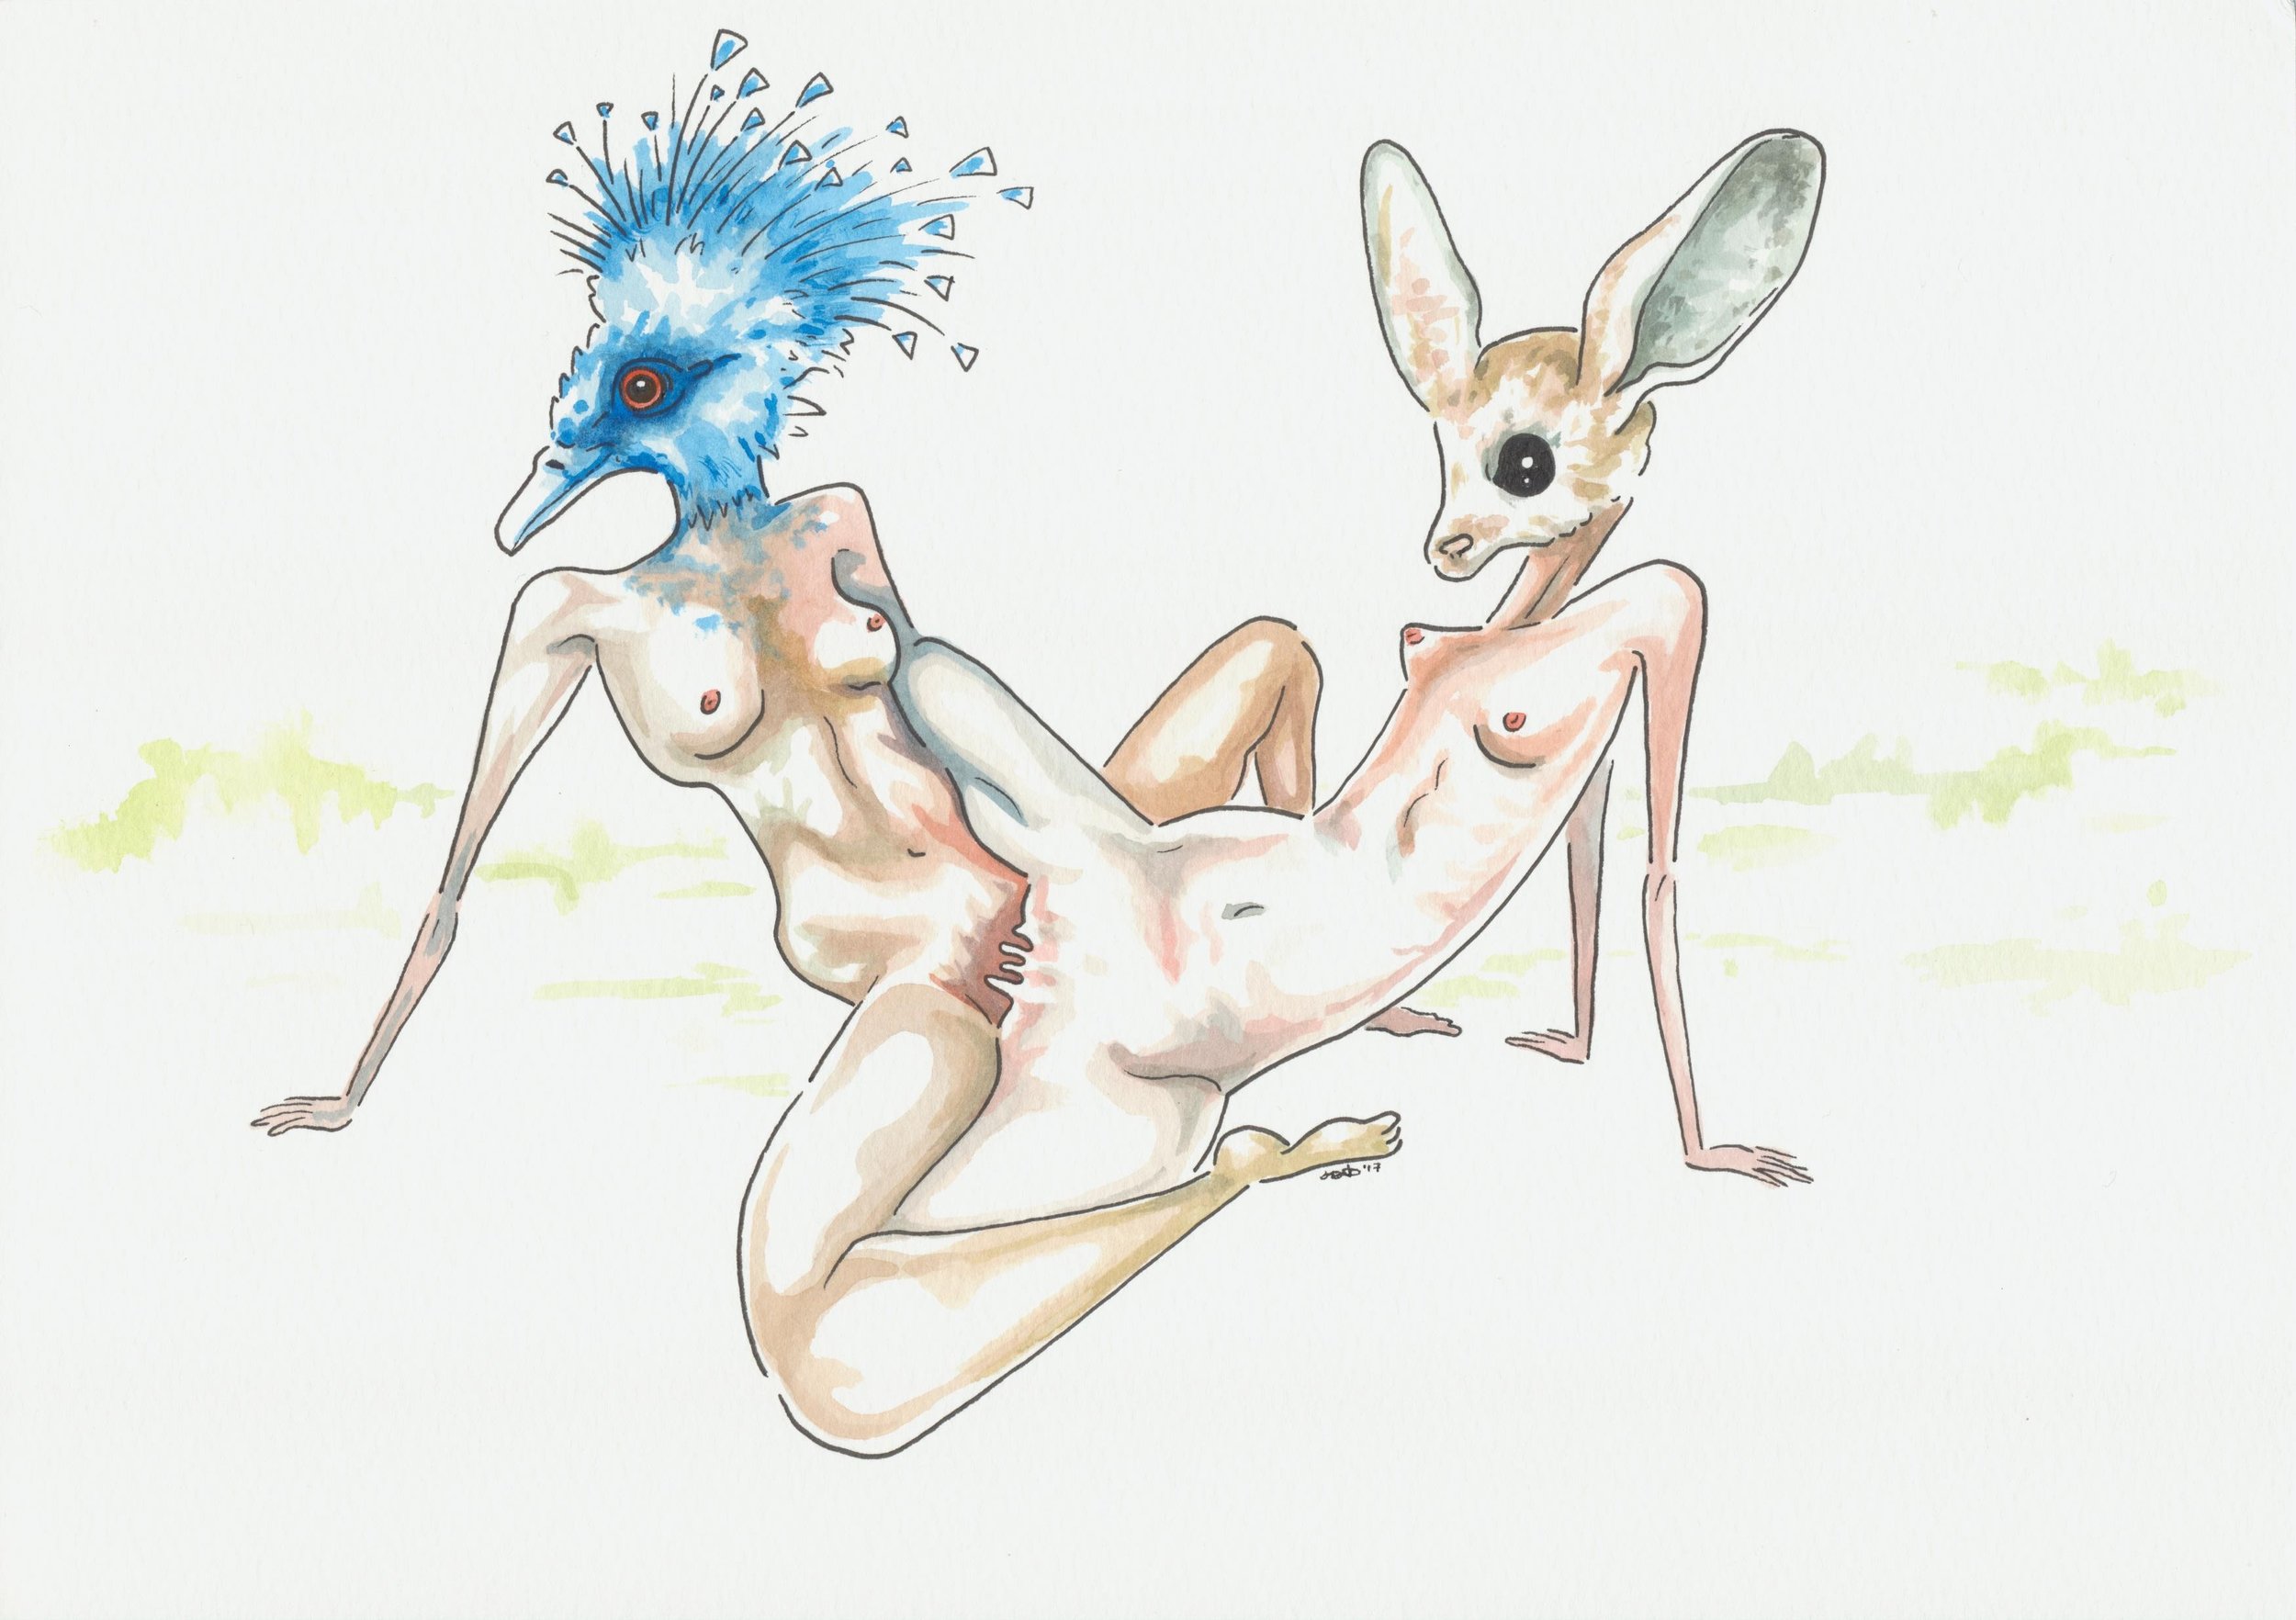 A bird lady and a deer lady scissoring